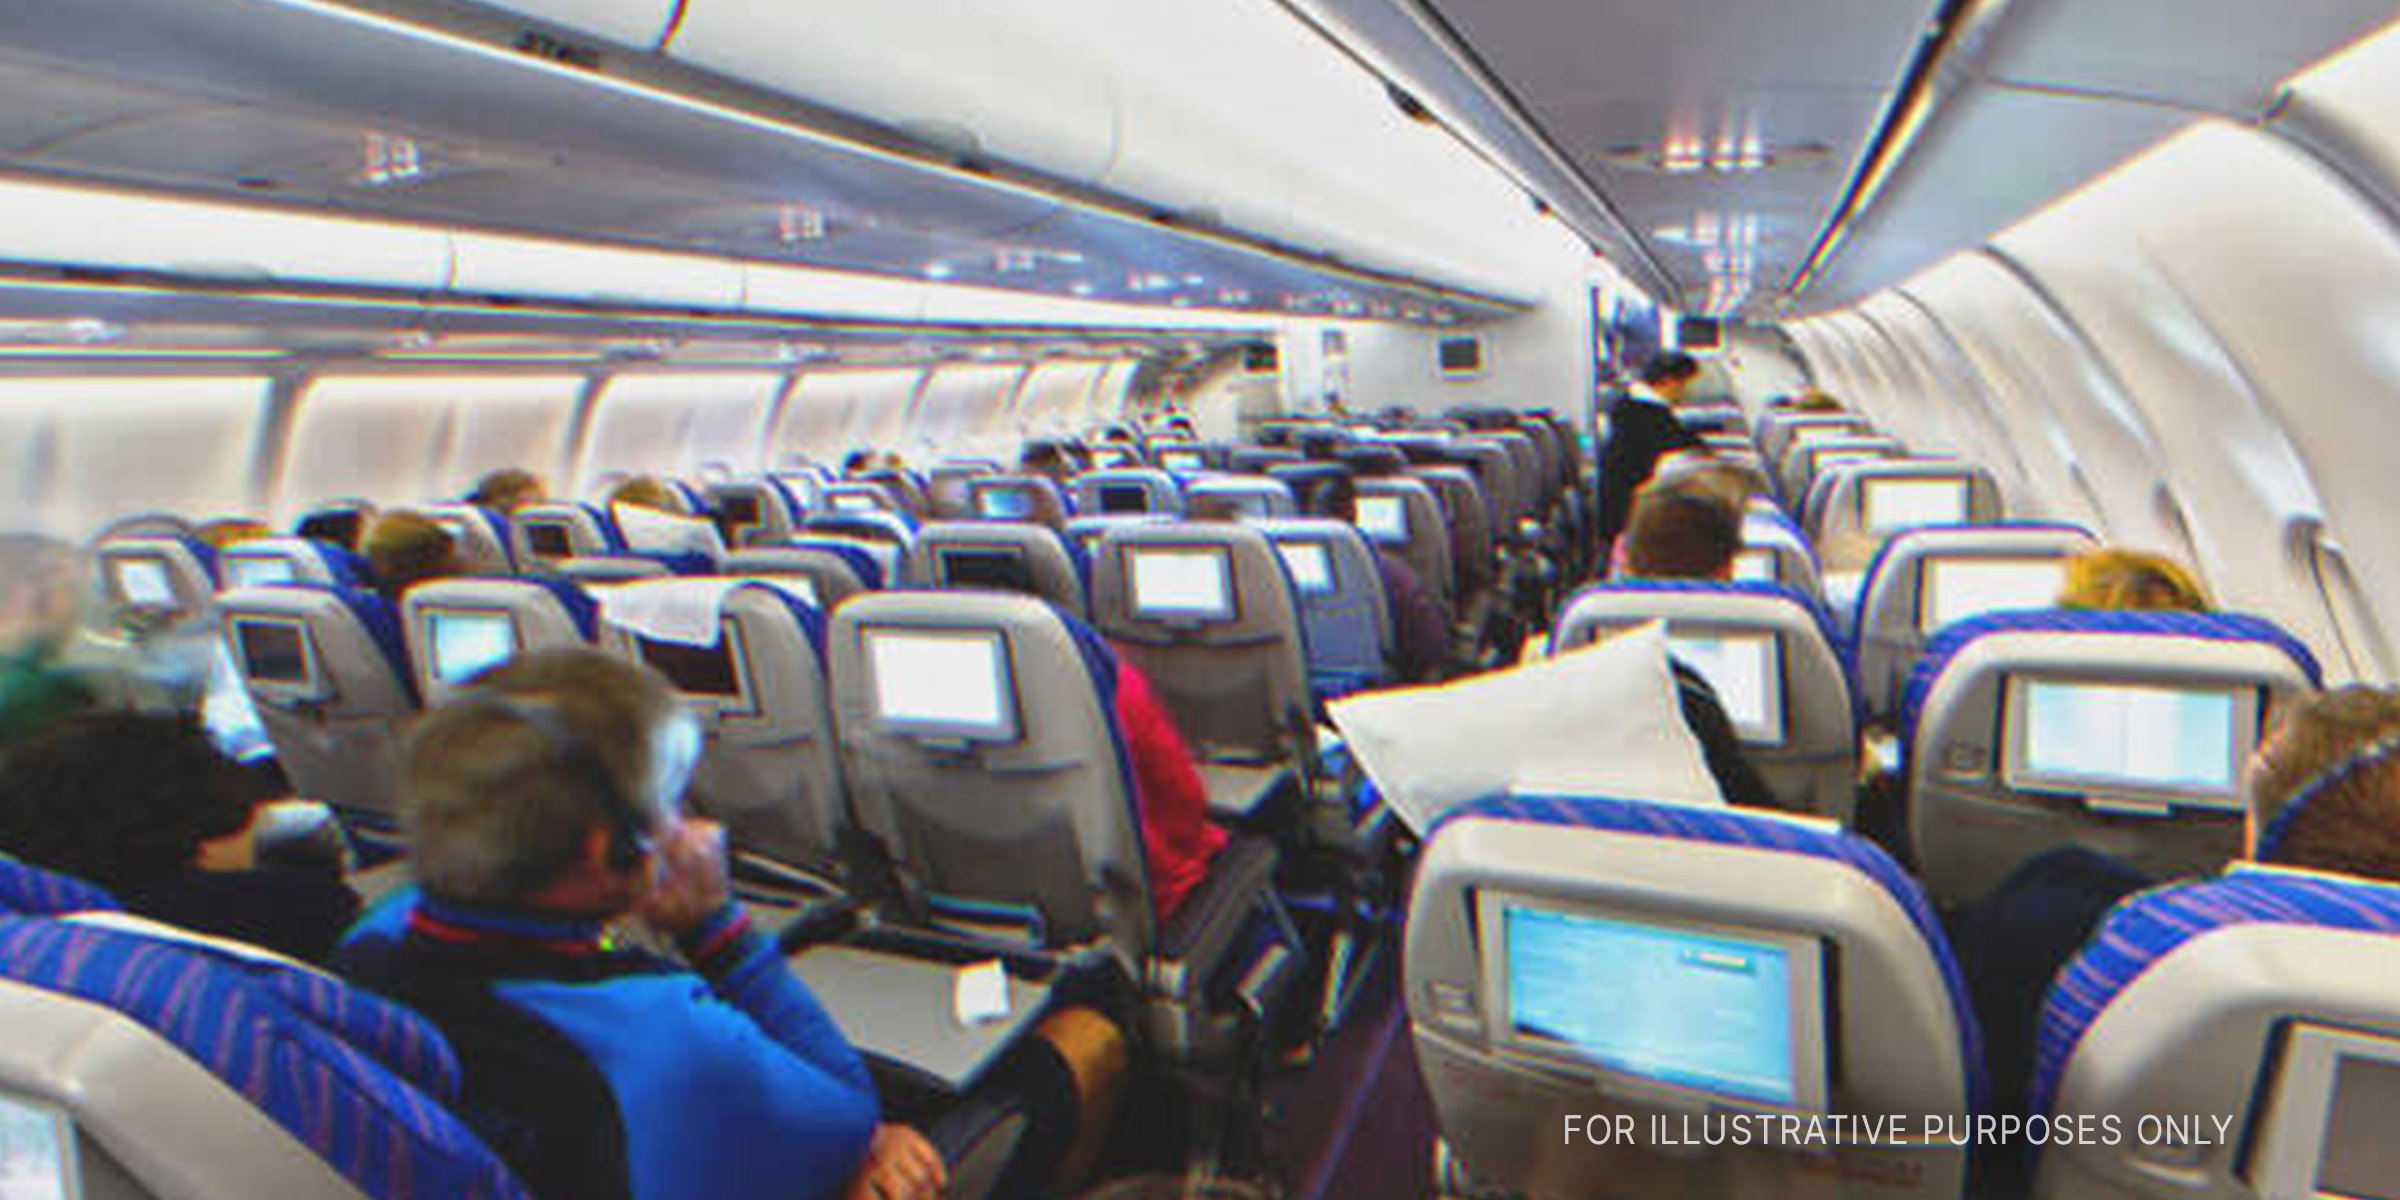 Passengers seated inside airplane | Source: Shutterstock